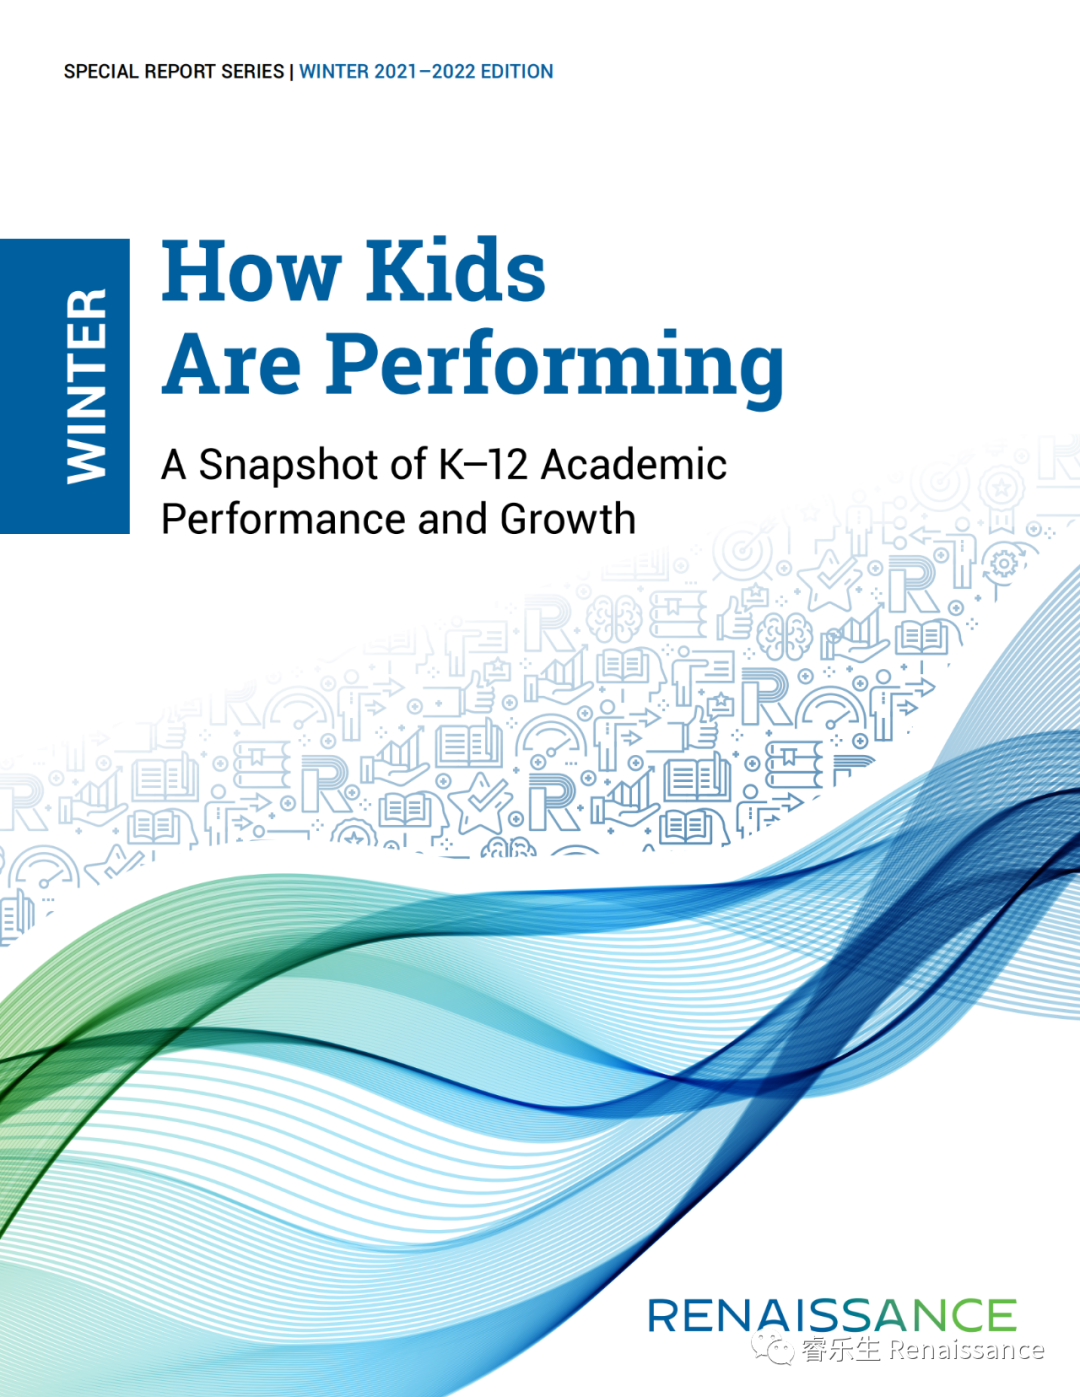 《How Kids are Performing》报告发布！